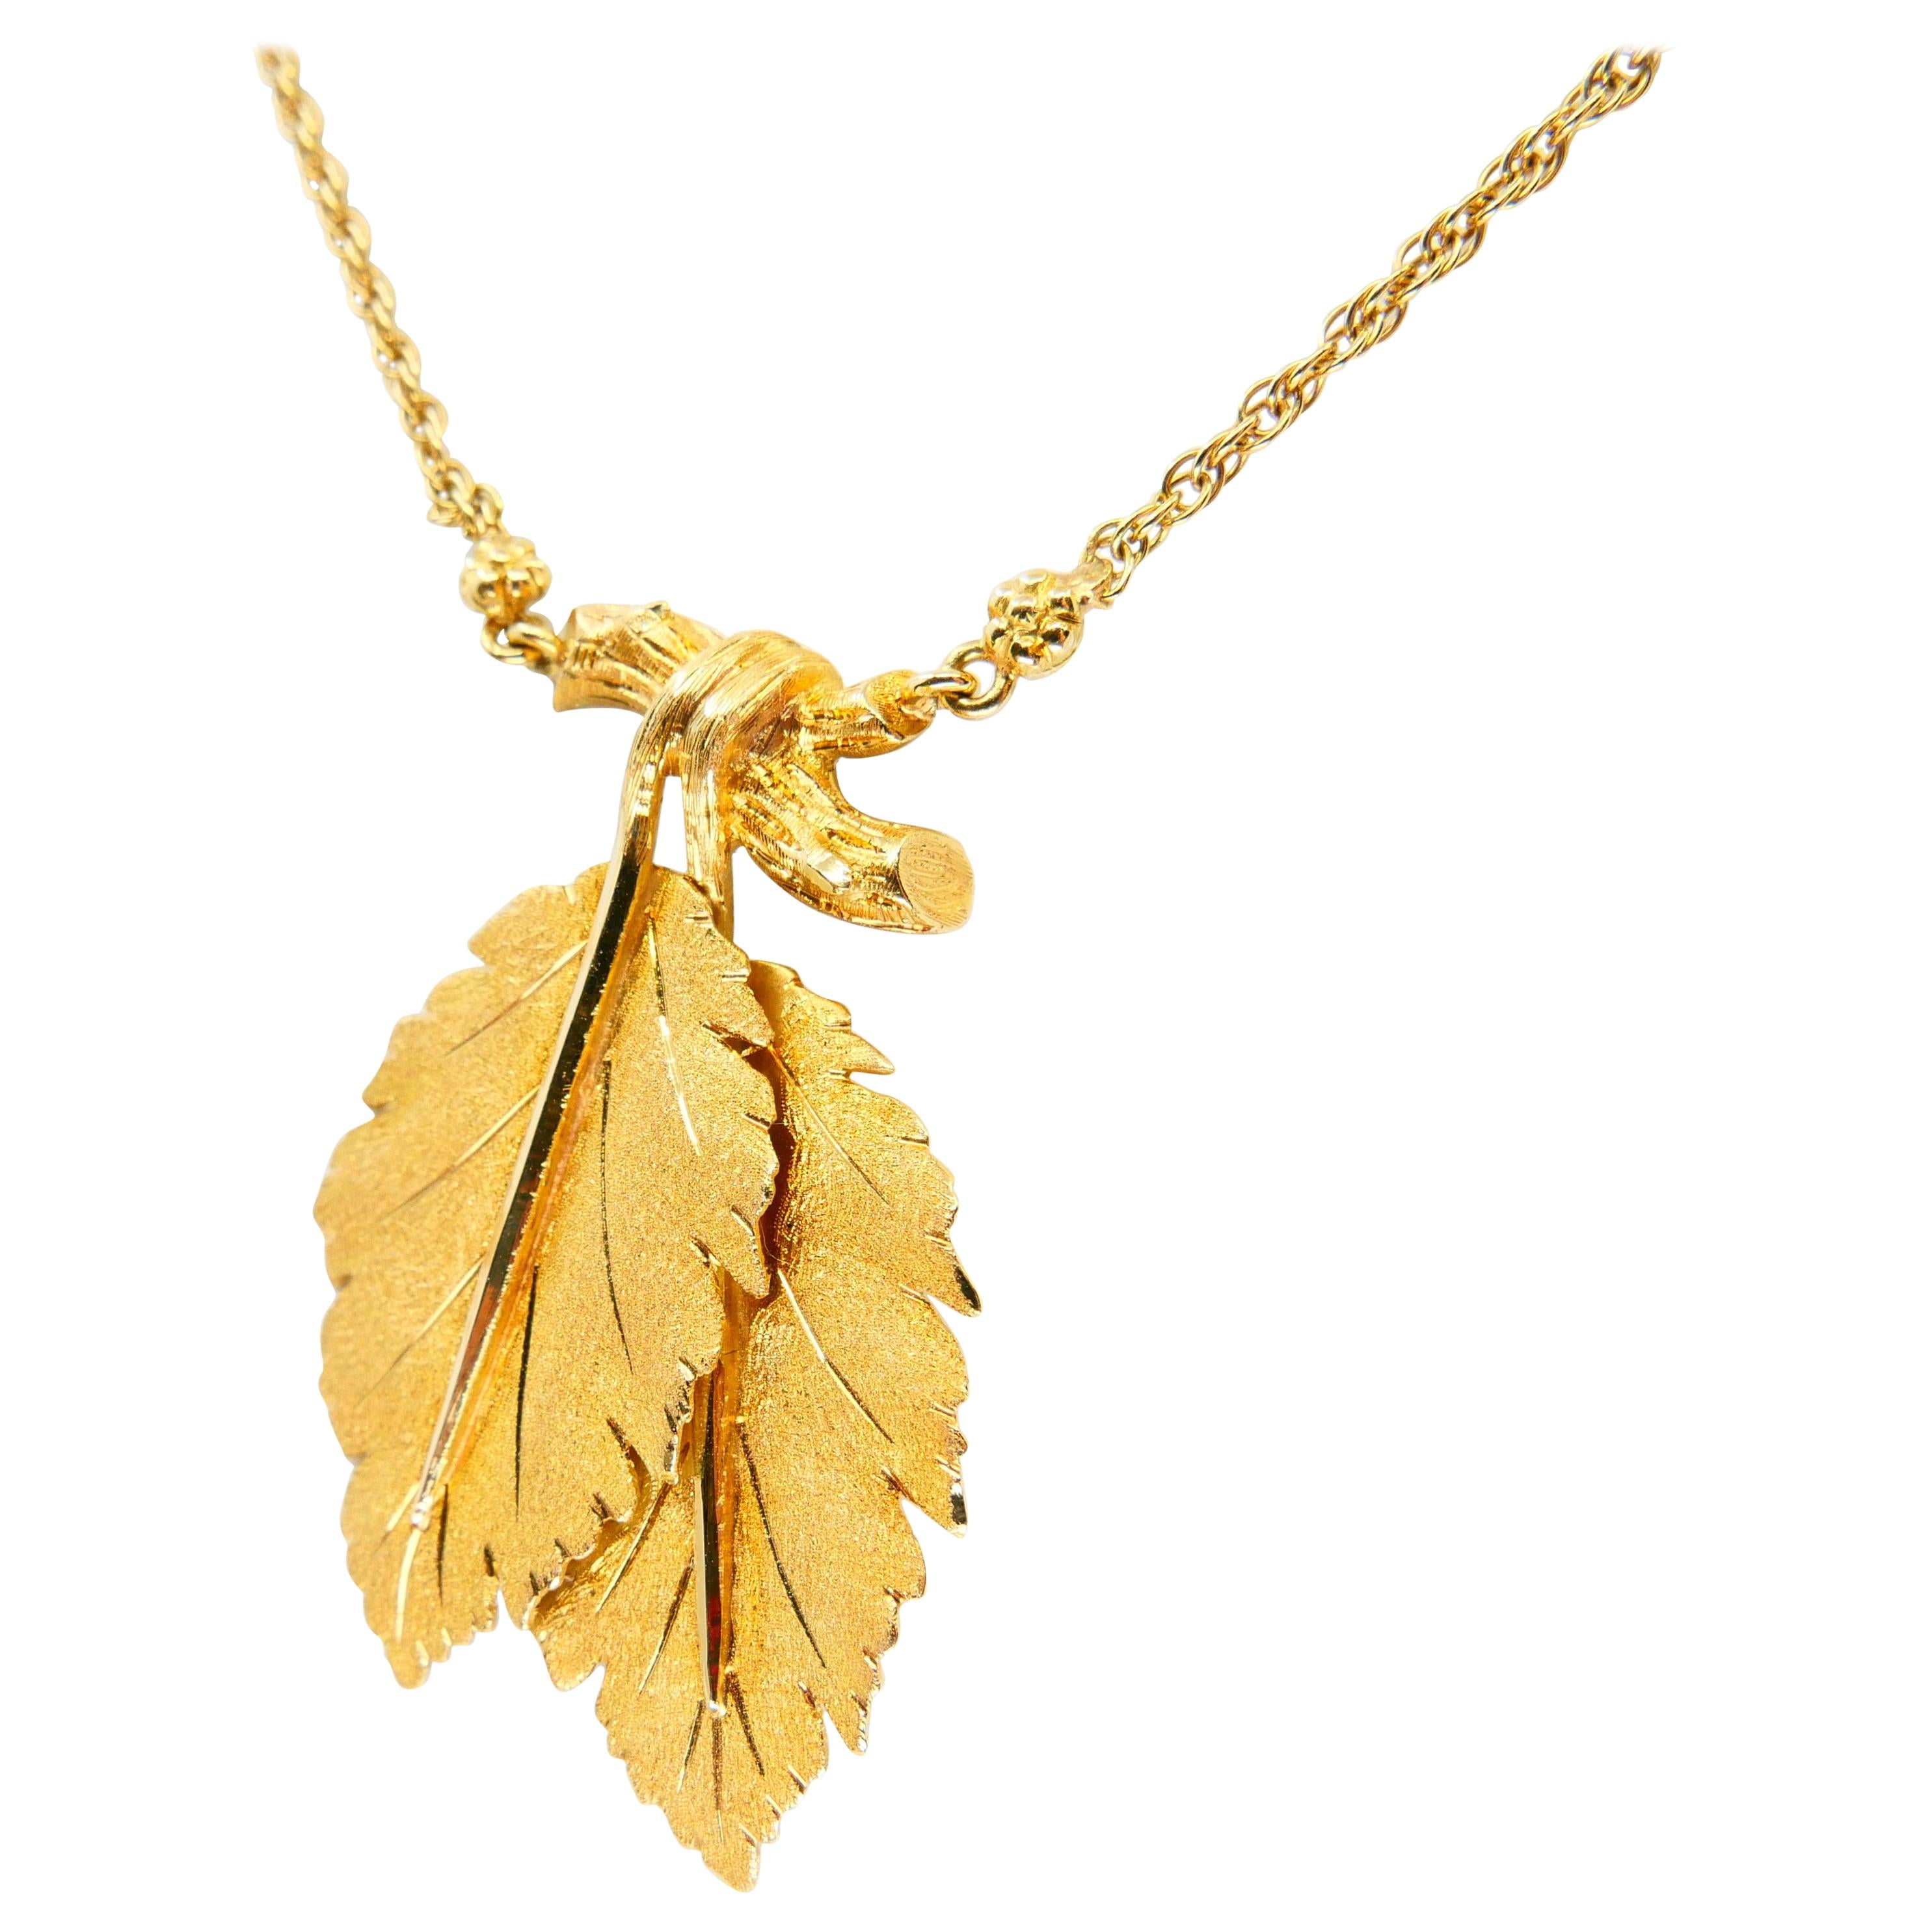 Buccellati, Federico 18K Yellow Gold Leaves and Twigs Pendant Drop Necklace 